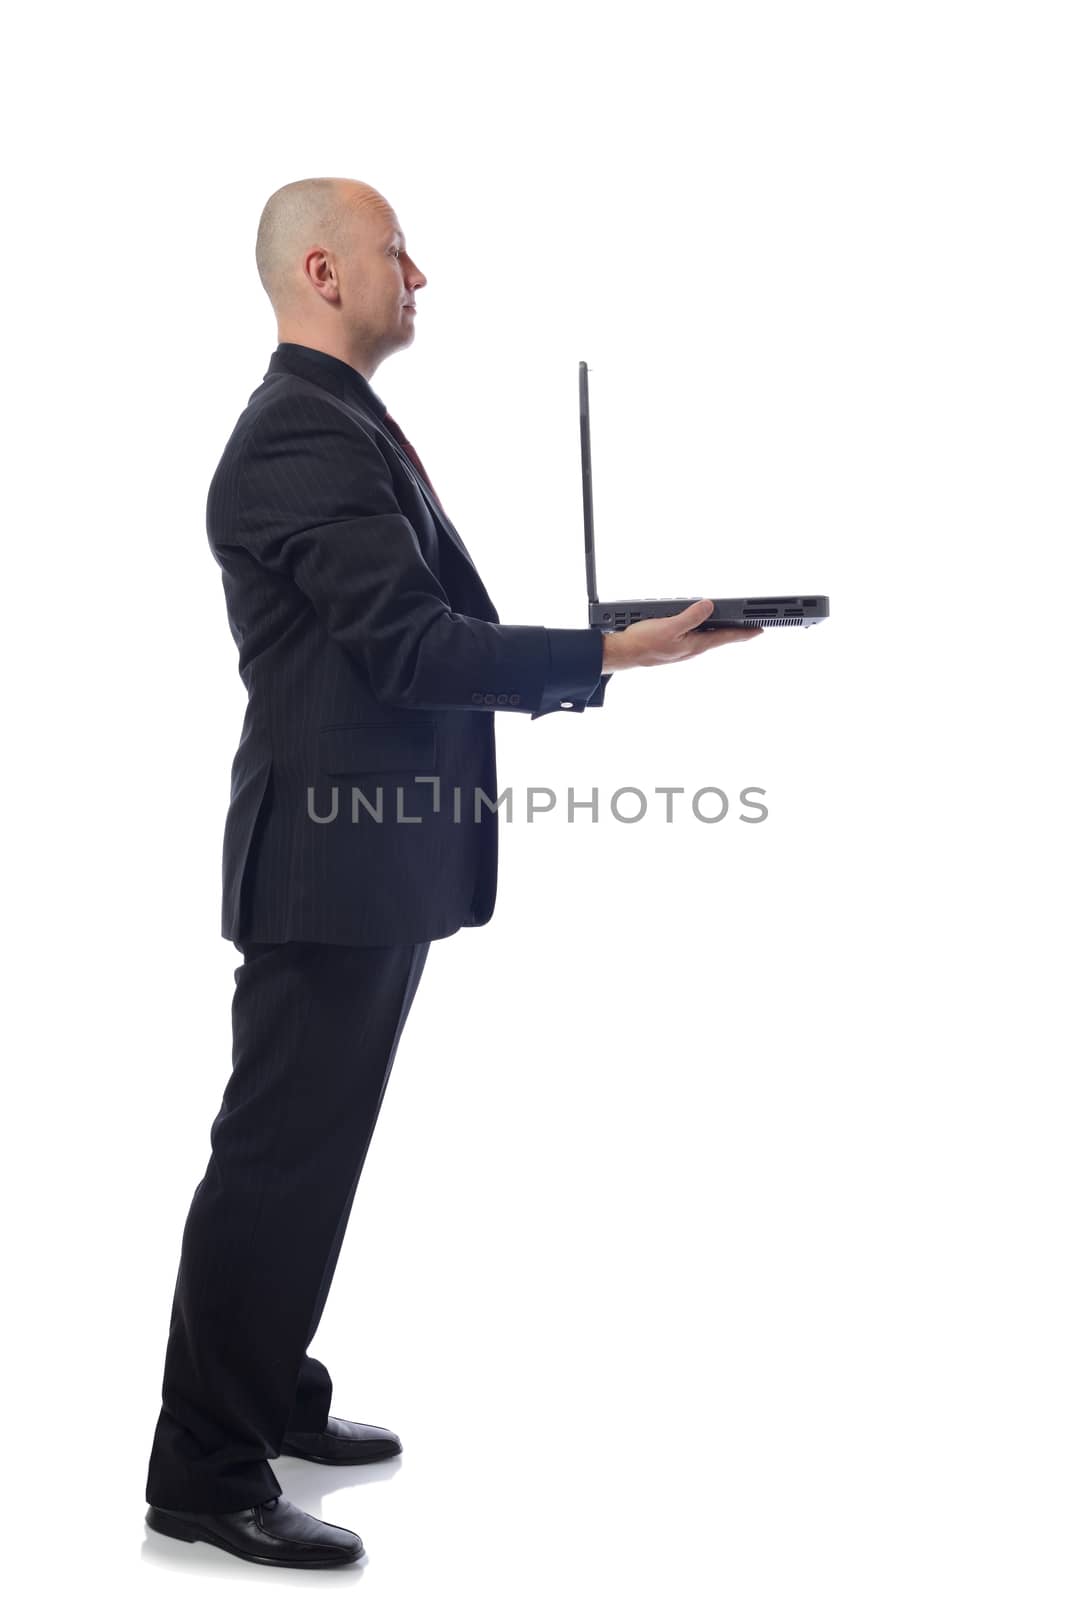 man presenting laptop in side view on white background 